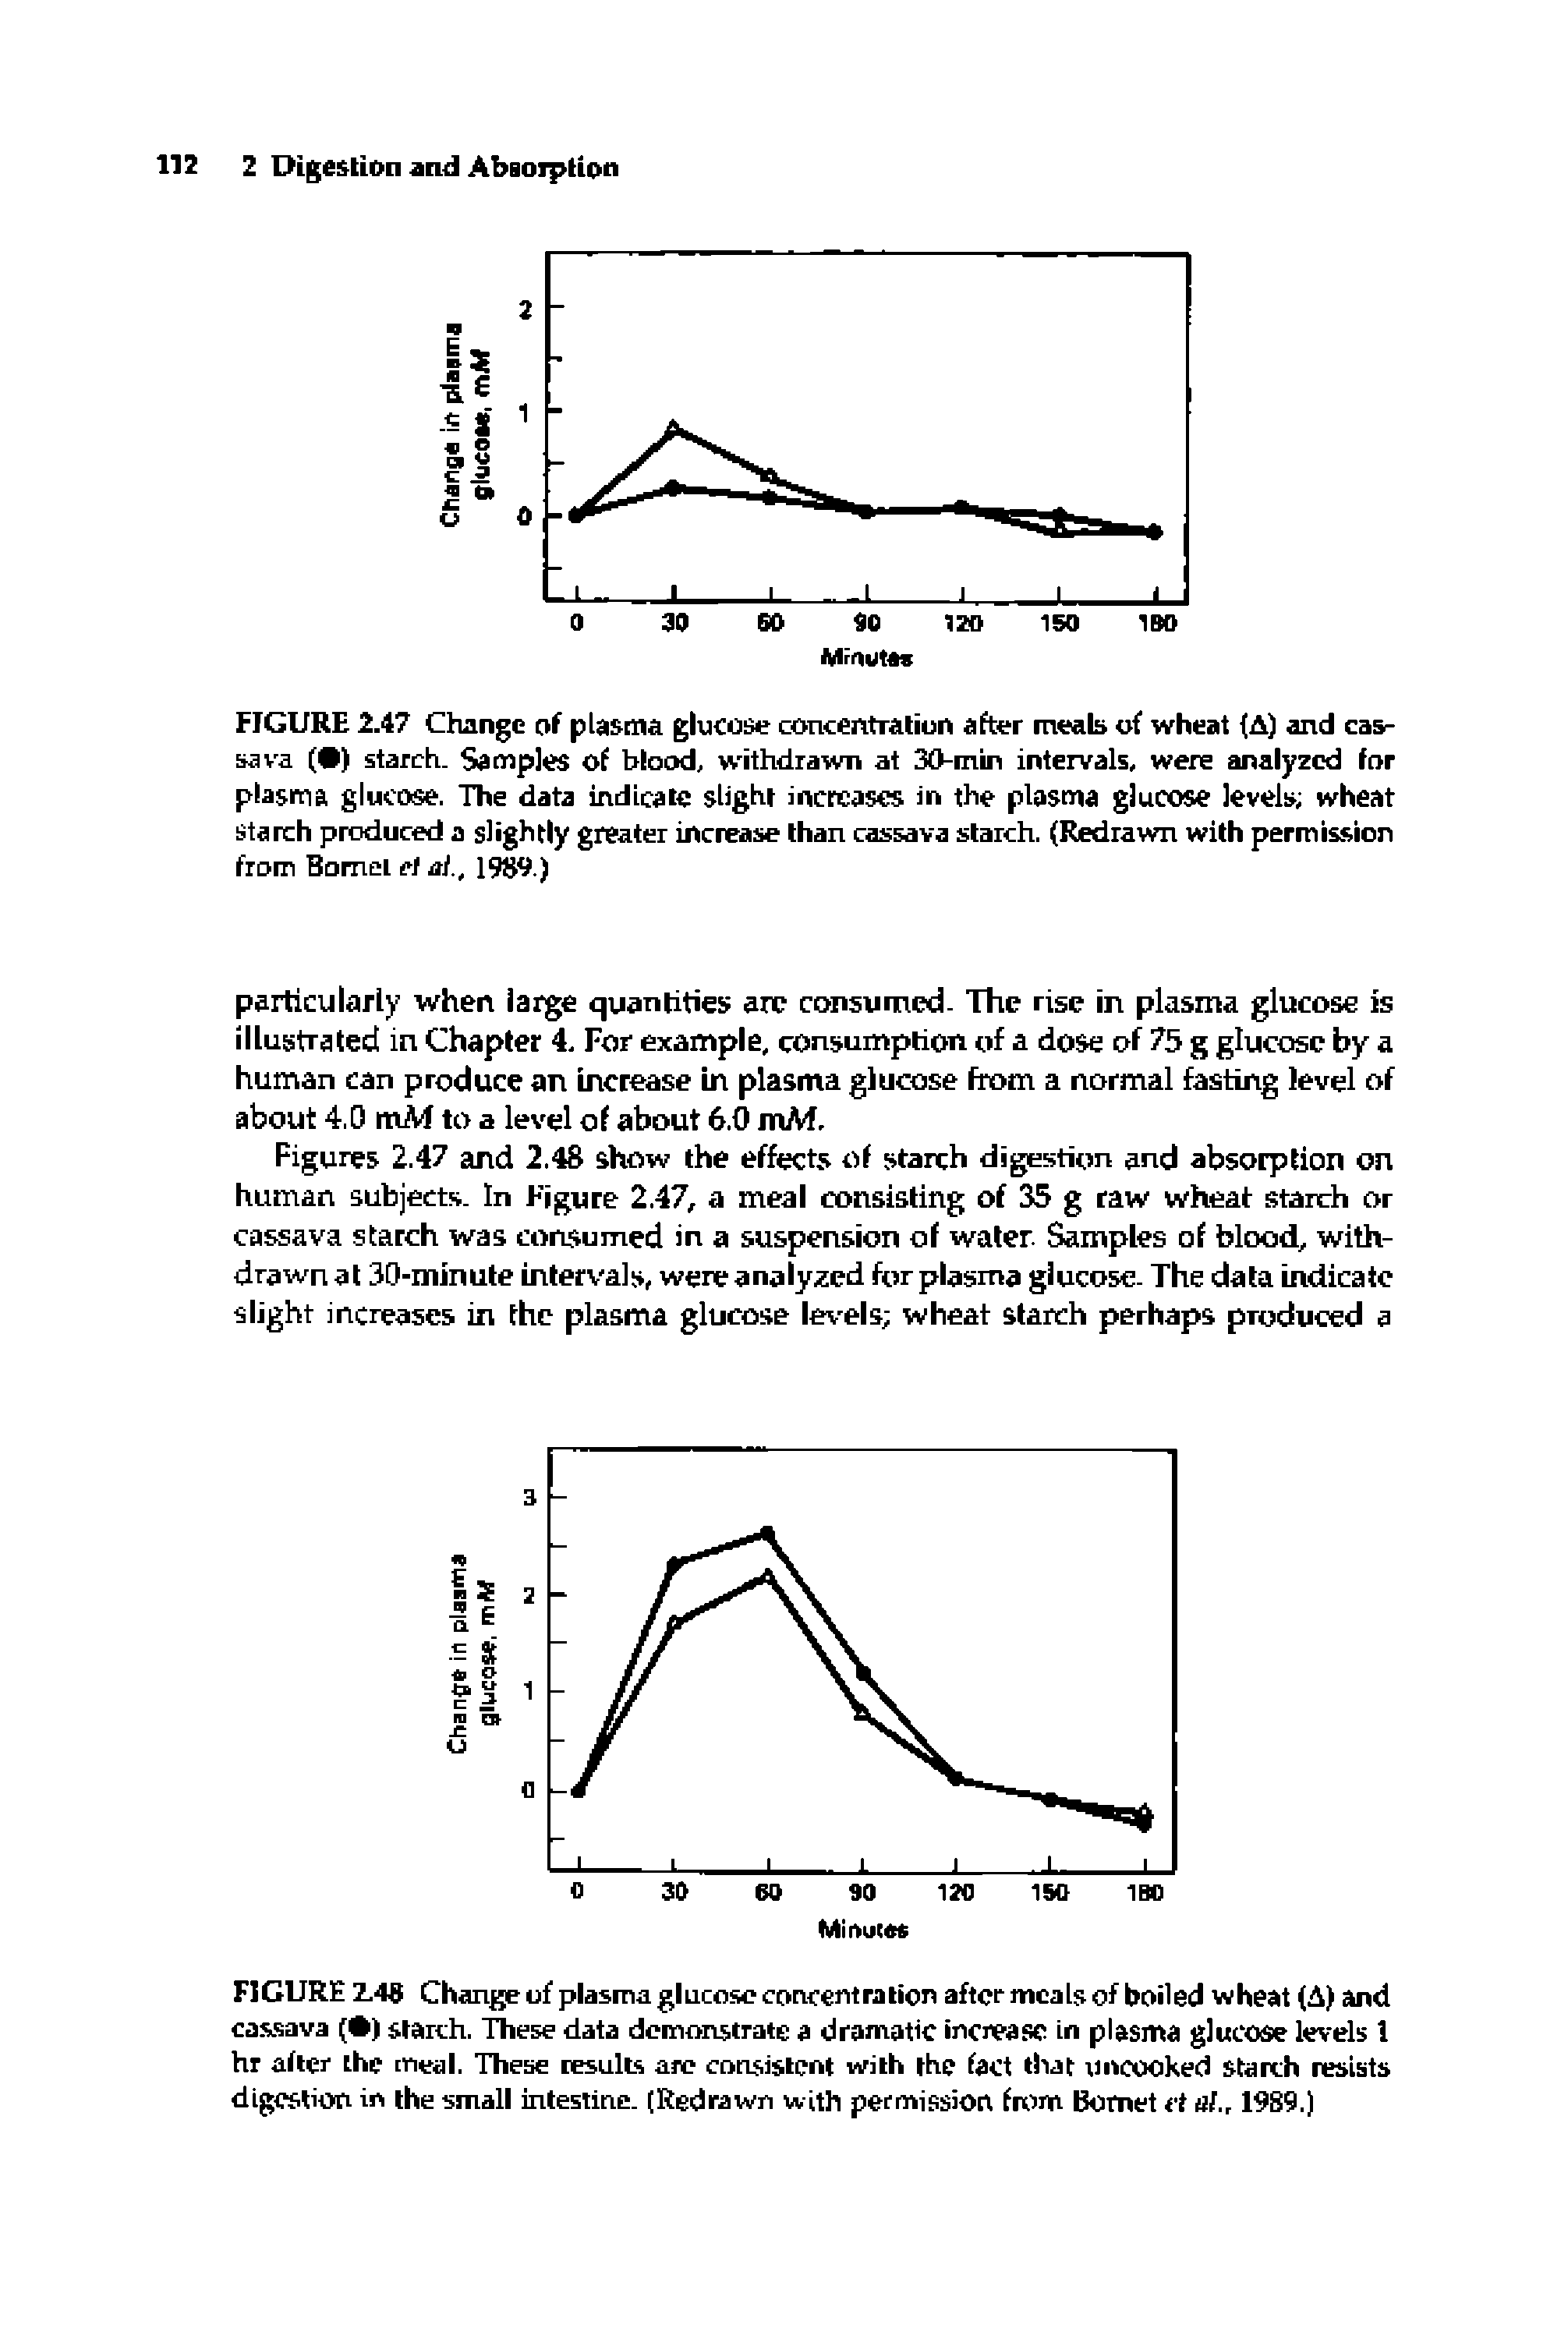 Figures 2.47 and 2.48 show the effects of starch digestion and absorption on human subjects. In Figure 2.47, a meal consisting of 35 g raw wheat starch or cassava starch was consumed in a suspension of water Samples of blood, withdrawn at 30-minute intervals, were analyzed for plasma glucose. The data indicate slight increases in the plasma glucose levels wheat starch perhaps produced a...